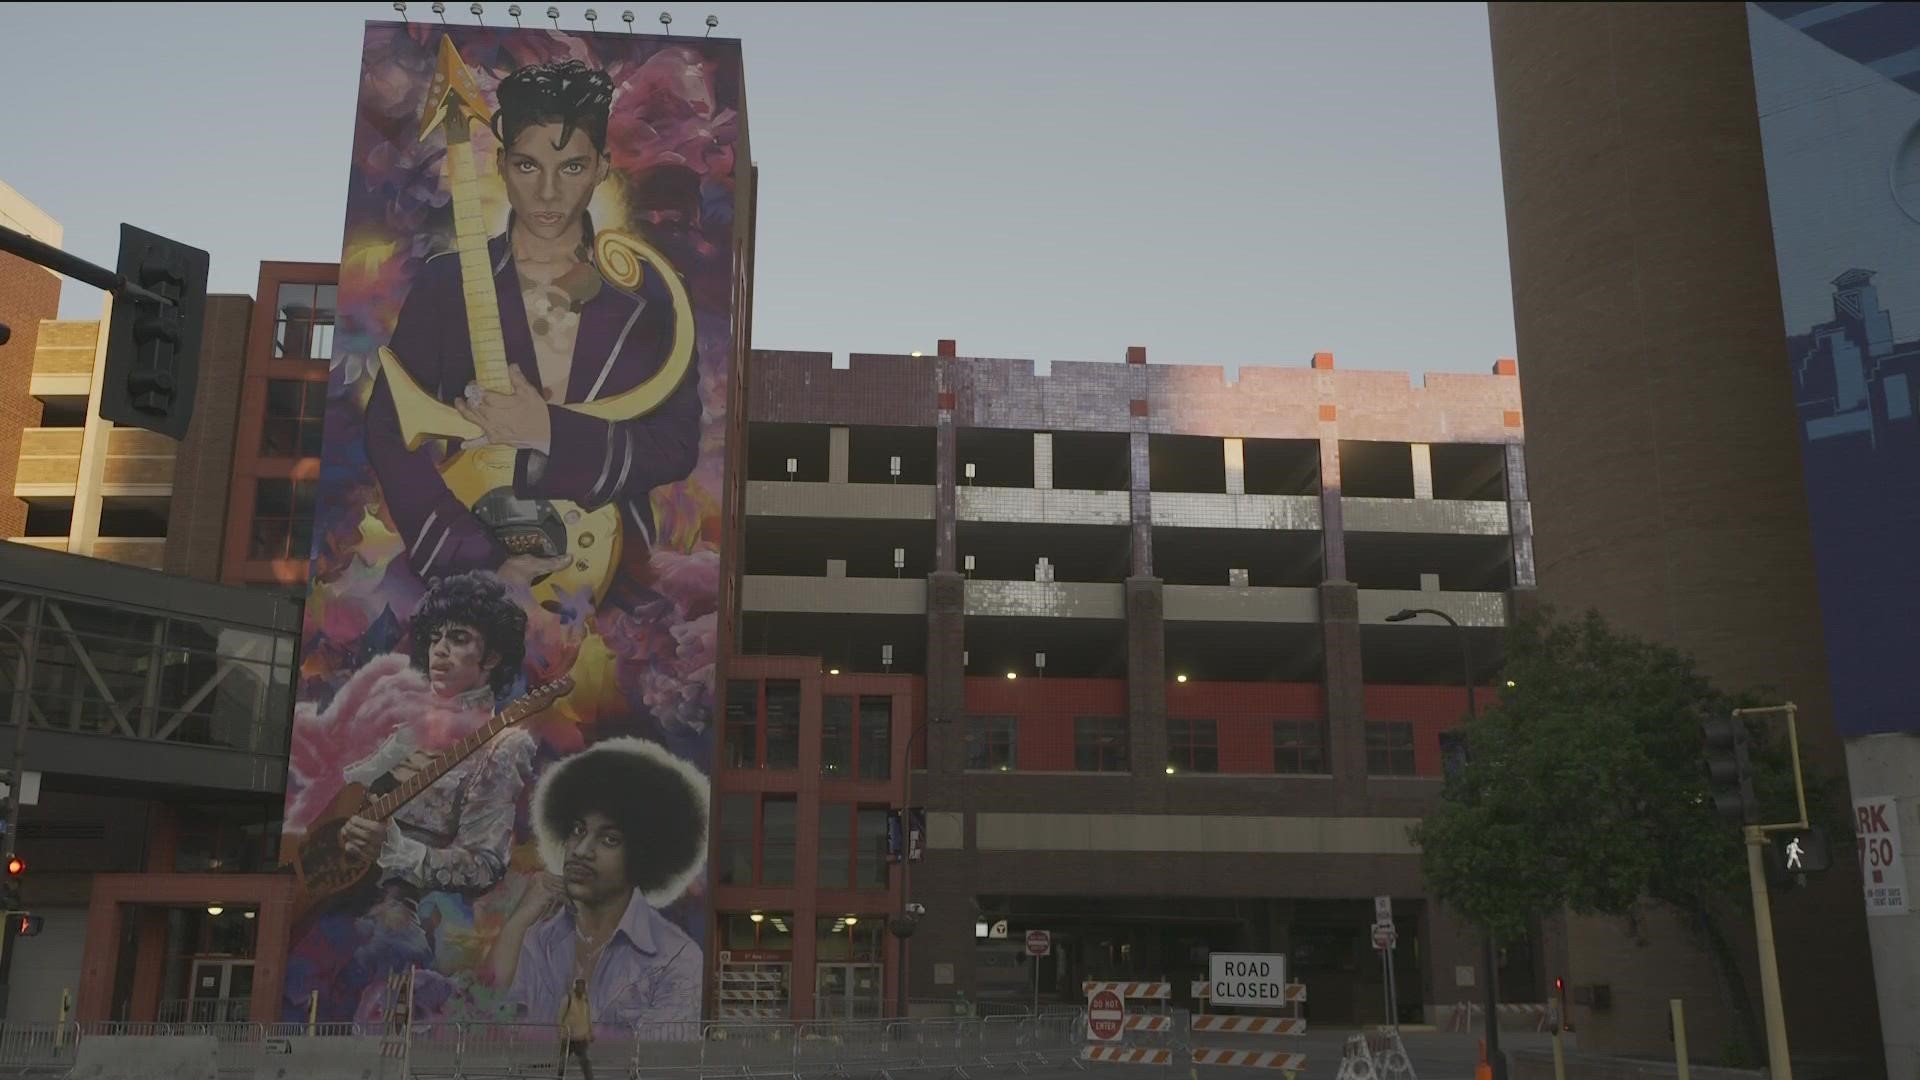 Painted by muralist Hiero Veiga, the tribute to Prince stands 100 feet tall and is located downtown Minneapolis at First Avenue and 8th Street.